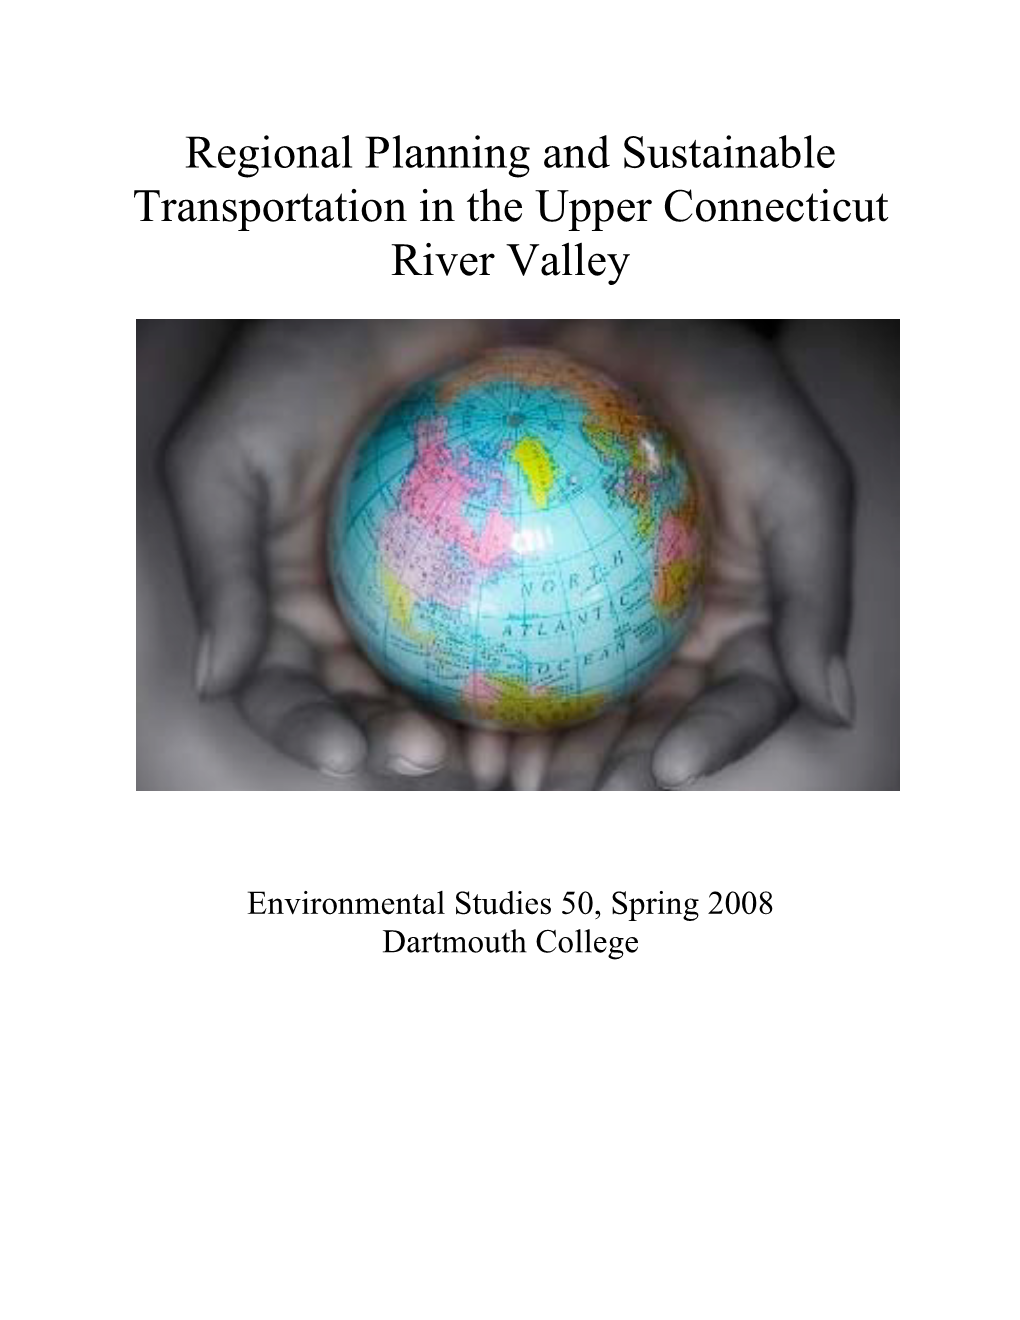 Regional Planning and Sustainable Transportation in the Upper Connecticut River Valley